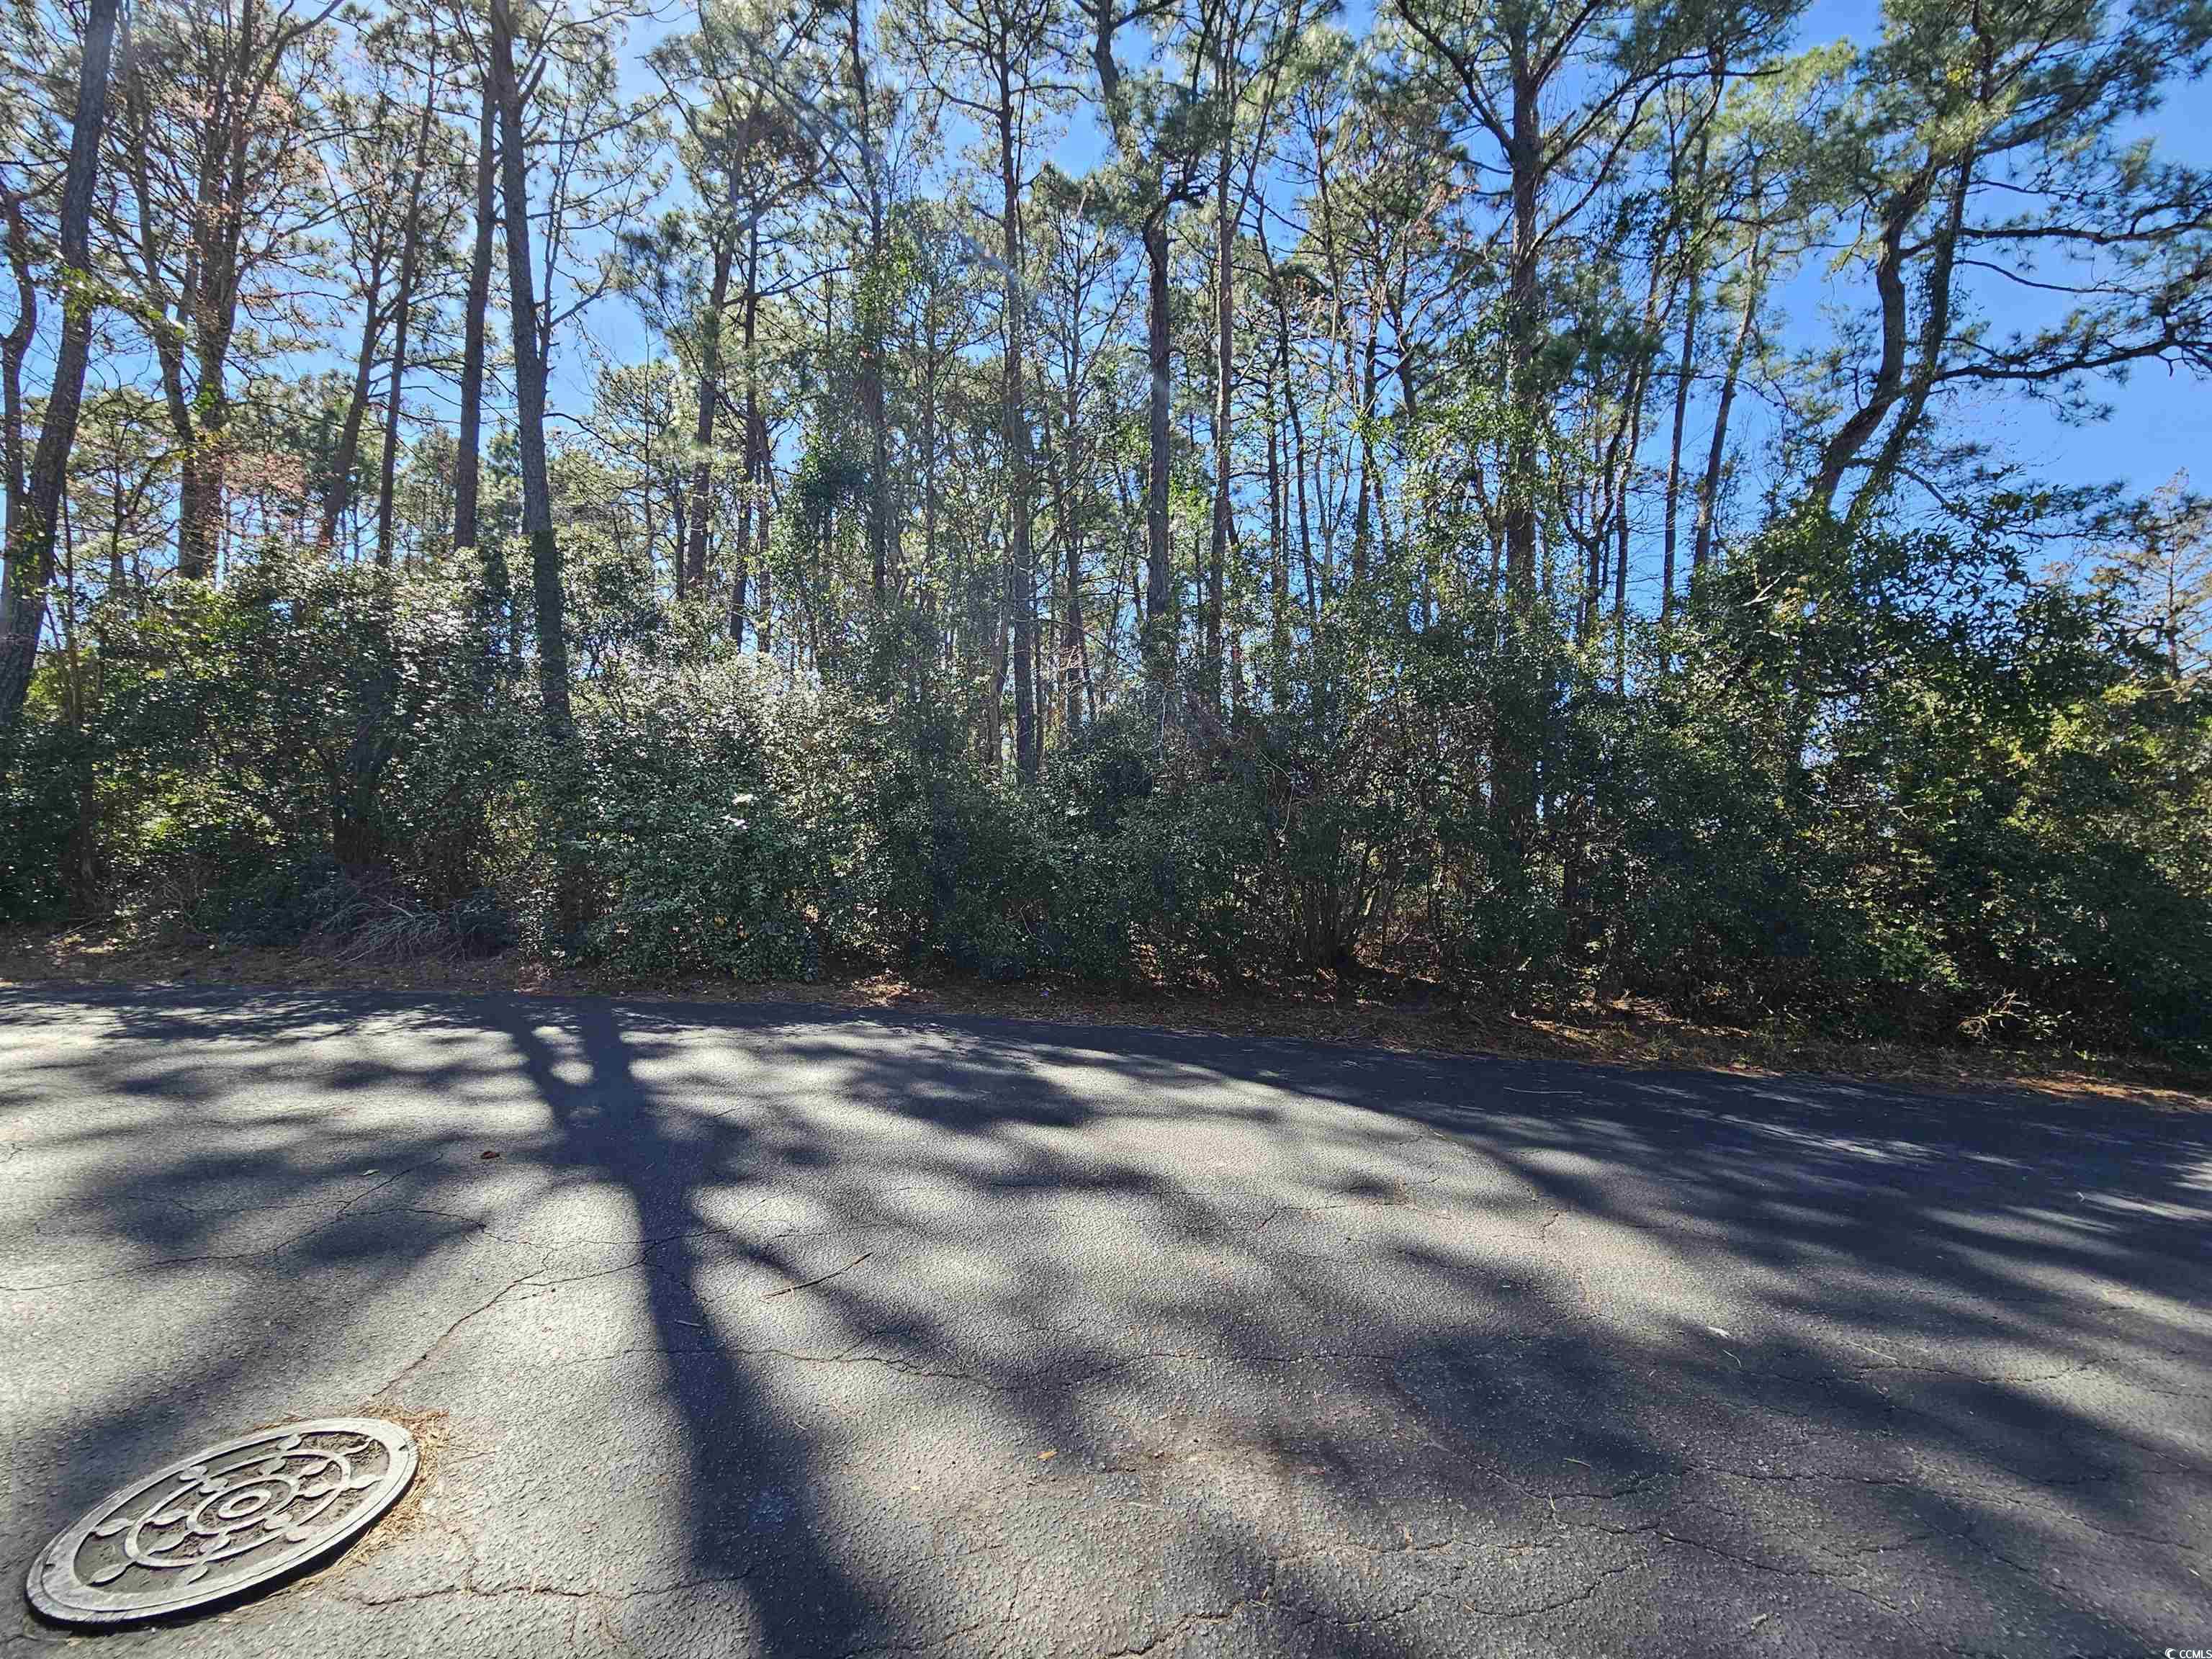 come build your dream home on this almost half acre lot in deerfield! large lot on a quiet cul de sac and just a golf cart ride to surfside beach. loon ct is off of a dead end street so great quiet and private location.